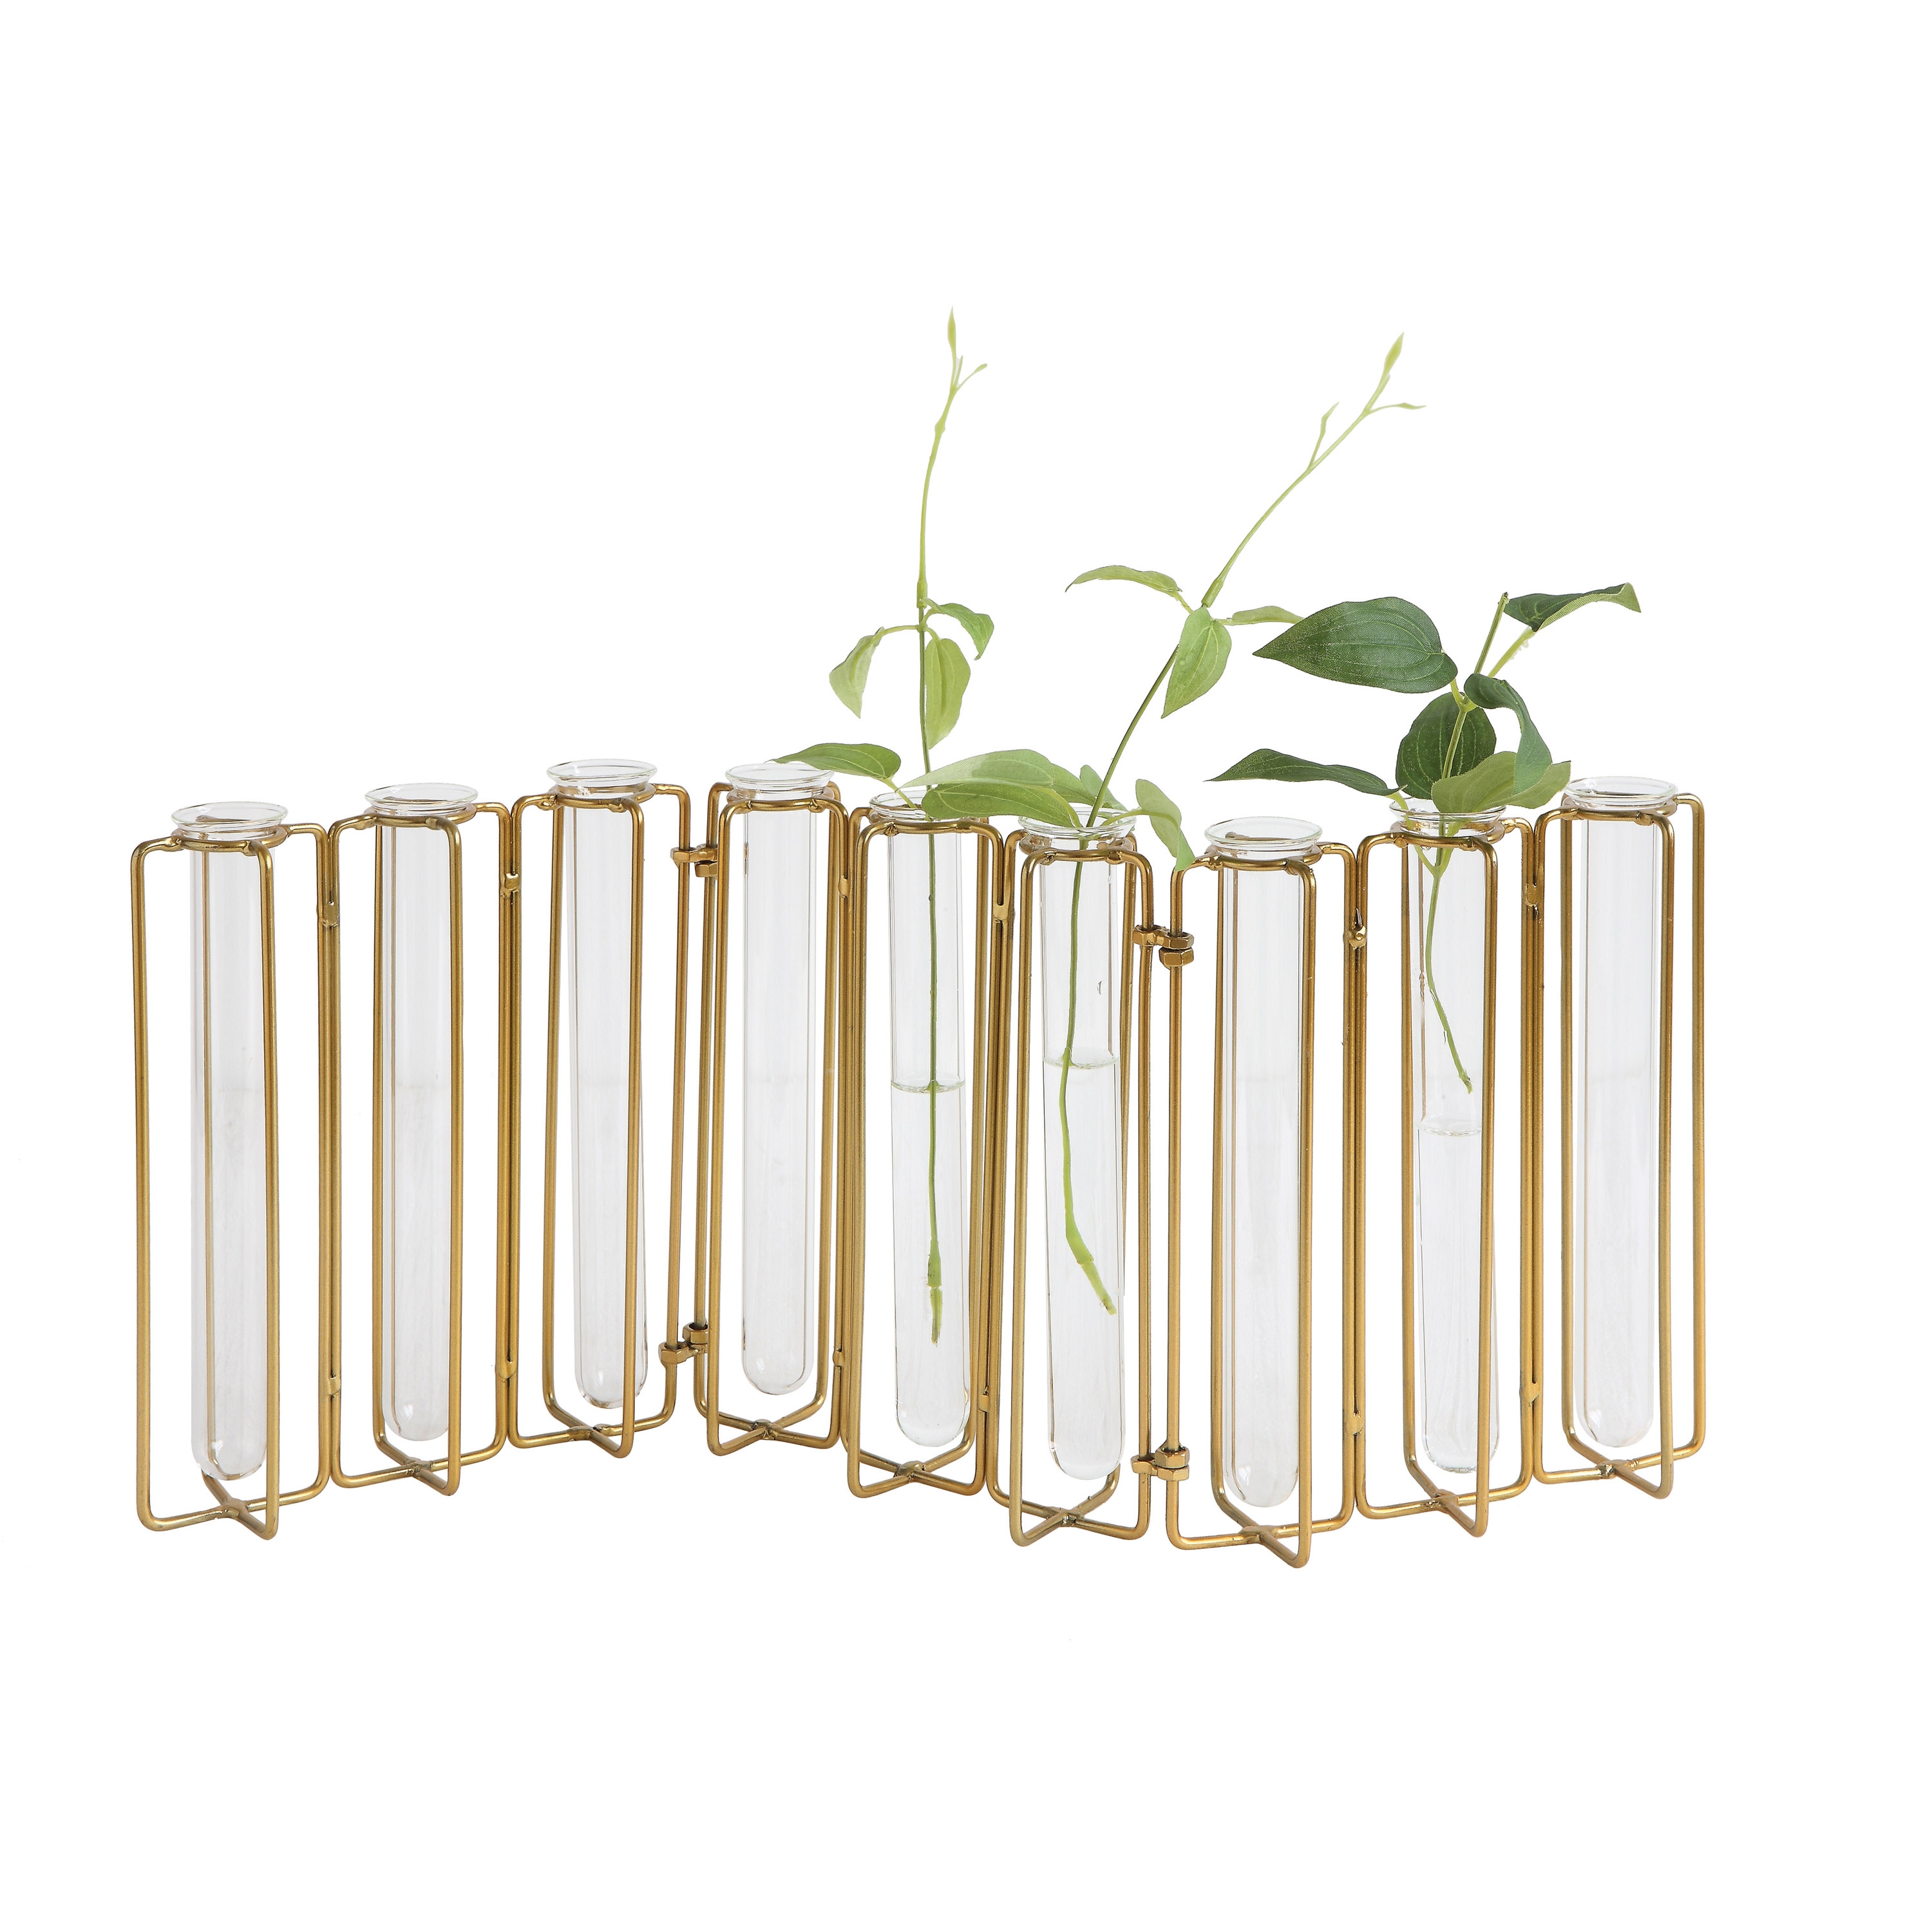 9 Test Tube Vases in a Single Gold Metal Stand - Image 0